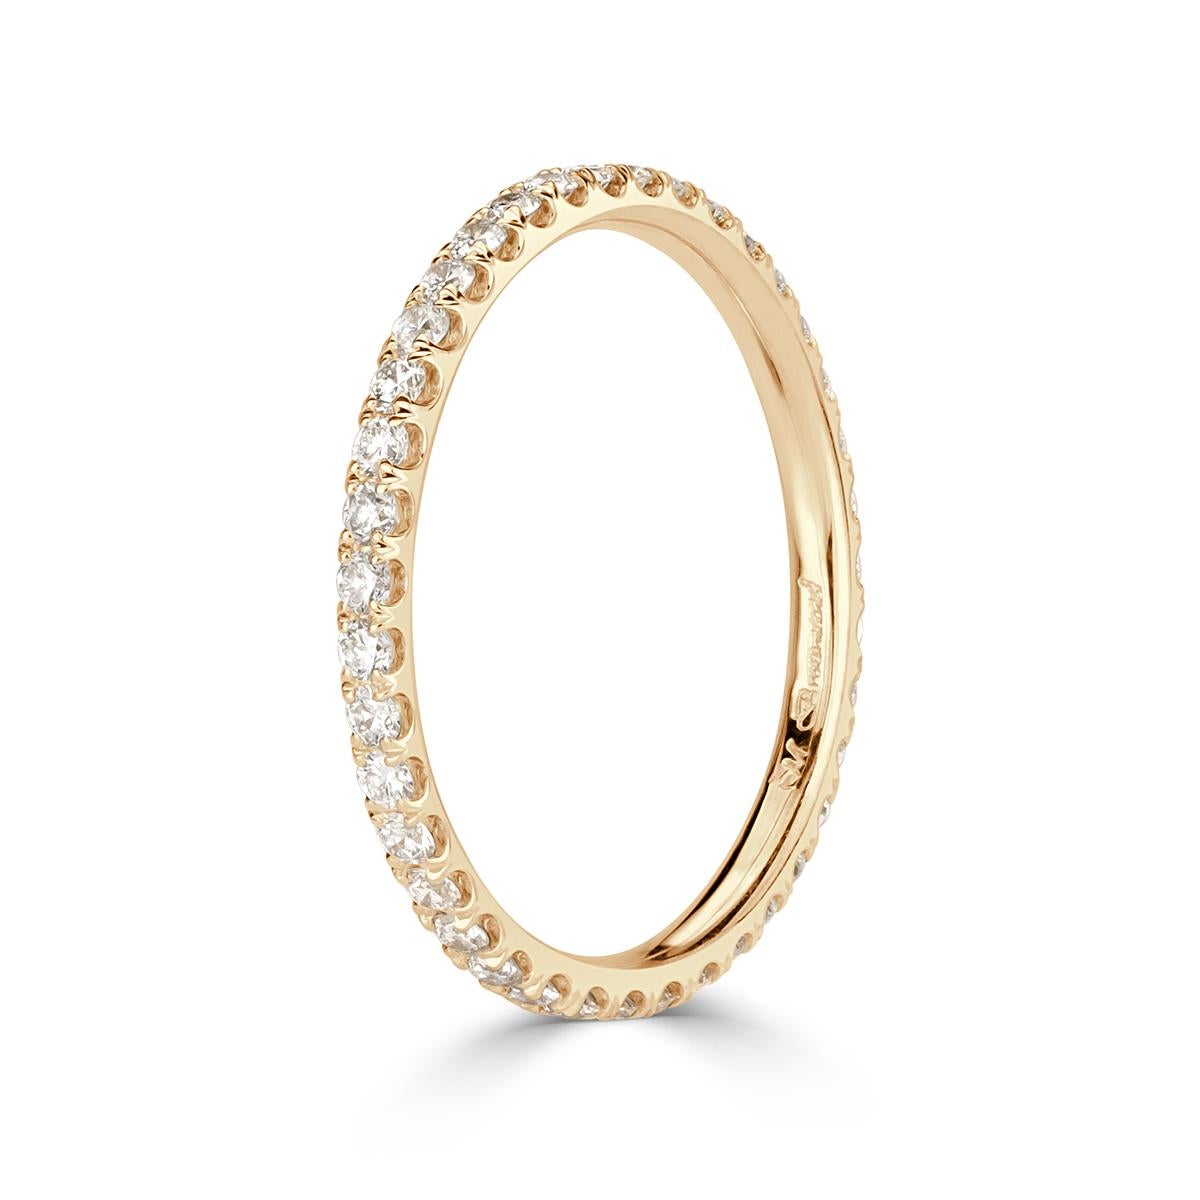 Custom created in our signature 18k champagne yellow gold, this ravishing diamond wedding band showcases 0.50ct of round brilliant cut diamonds graded at top qualities of E-F in color, VS1-VS2 in clarity. Absolutely perfect to wear on its own or to